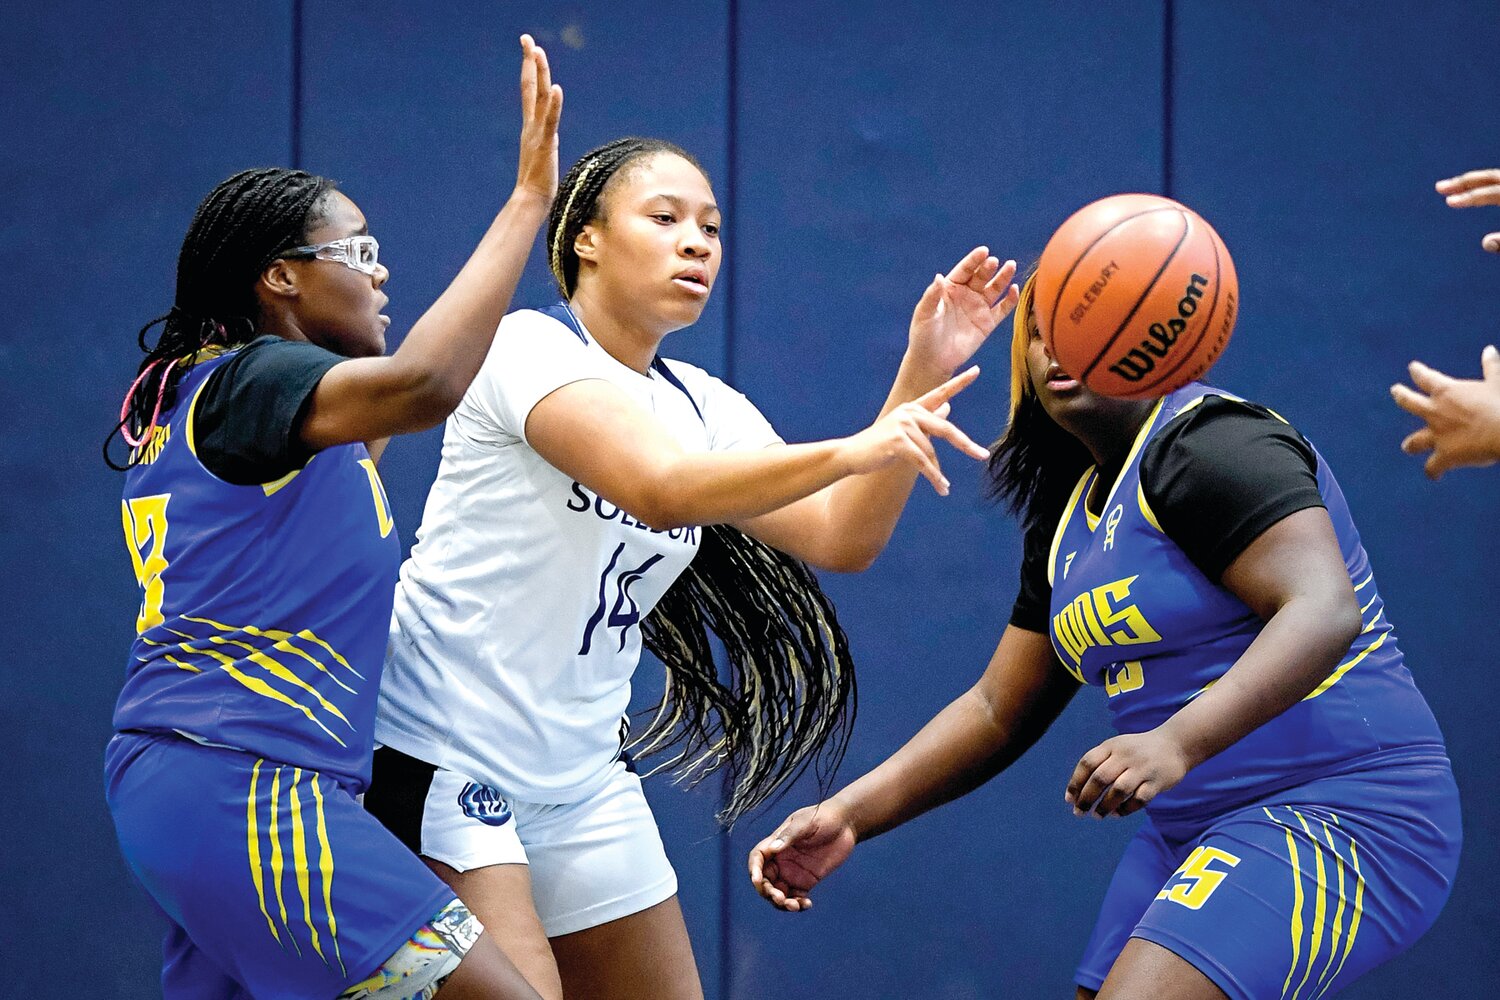 Solebury School’s Sarea Leonard-Jenkins splits the defense to get off a pass in front of The City School’s Janiah Green and Maiya Porter.